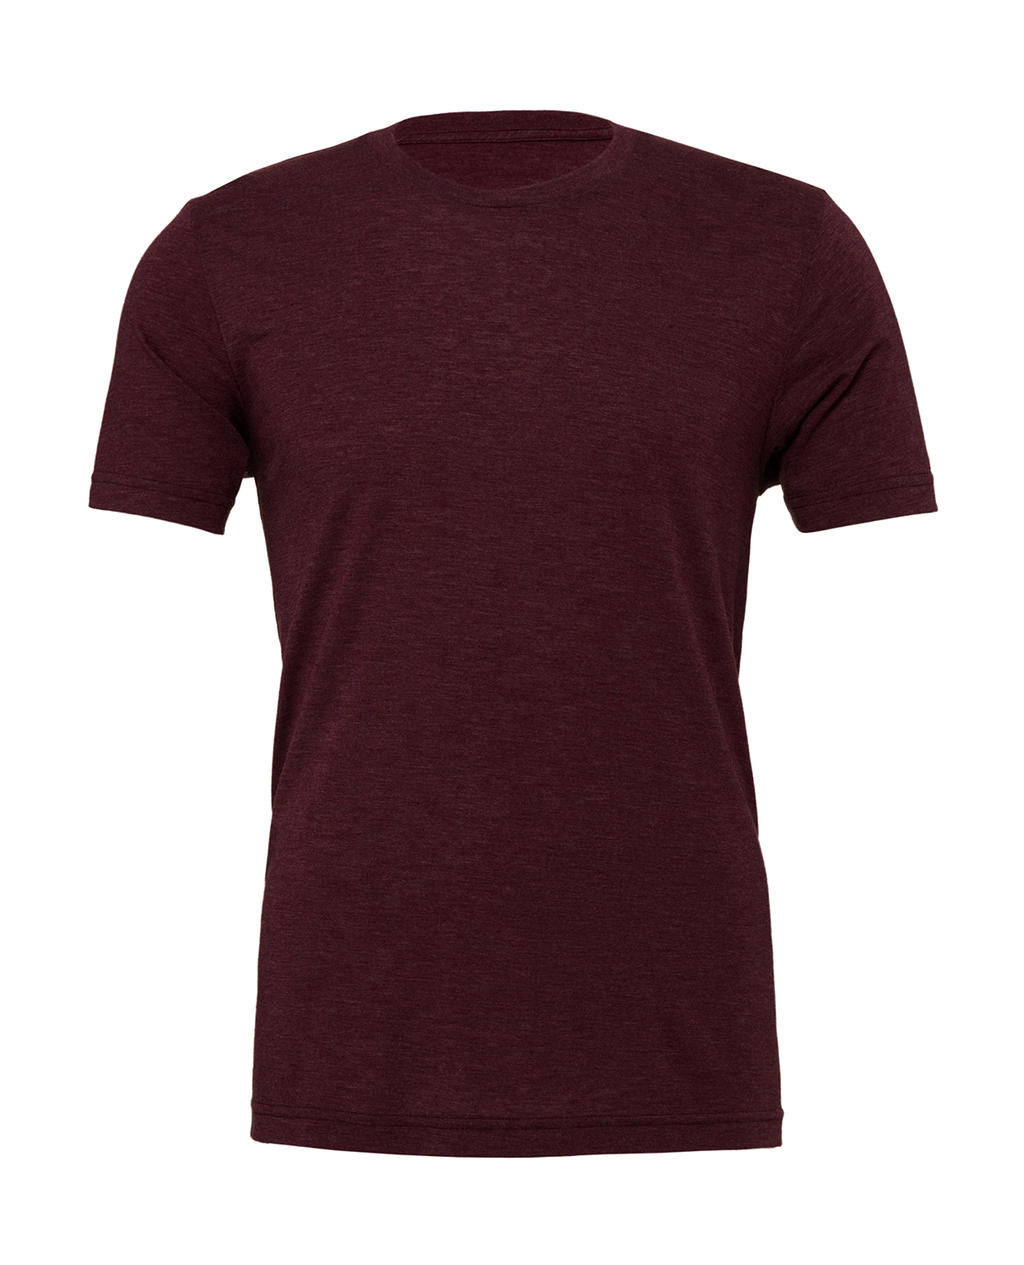  Unisex Triblend Short Sleeve Tee in Farbe Maroon Triblend